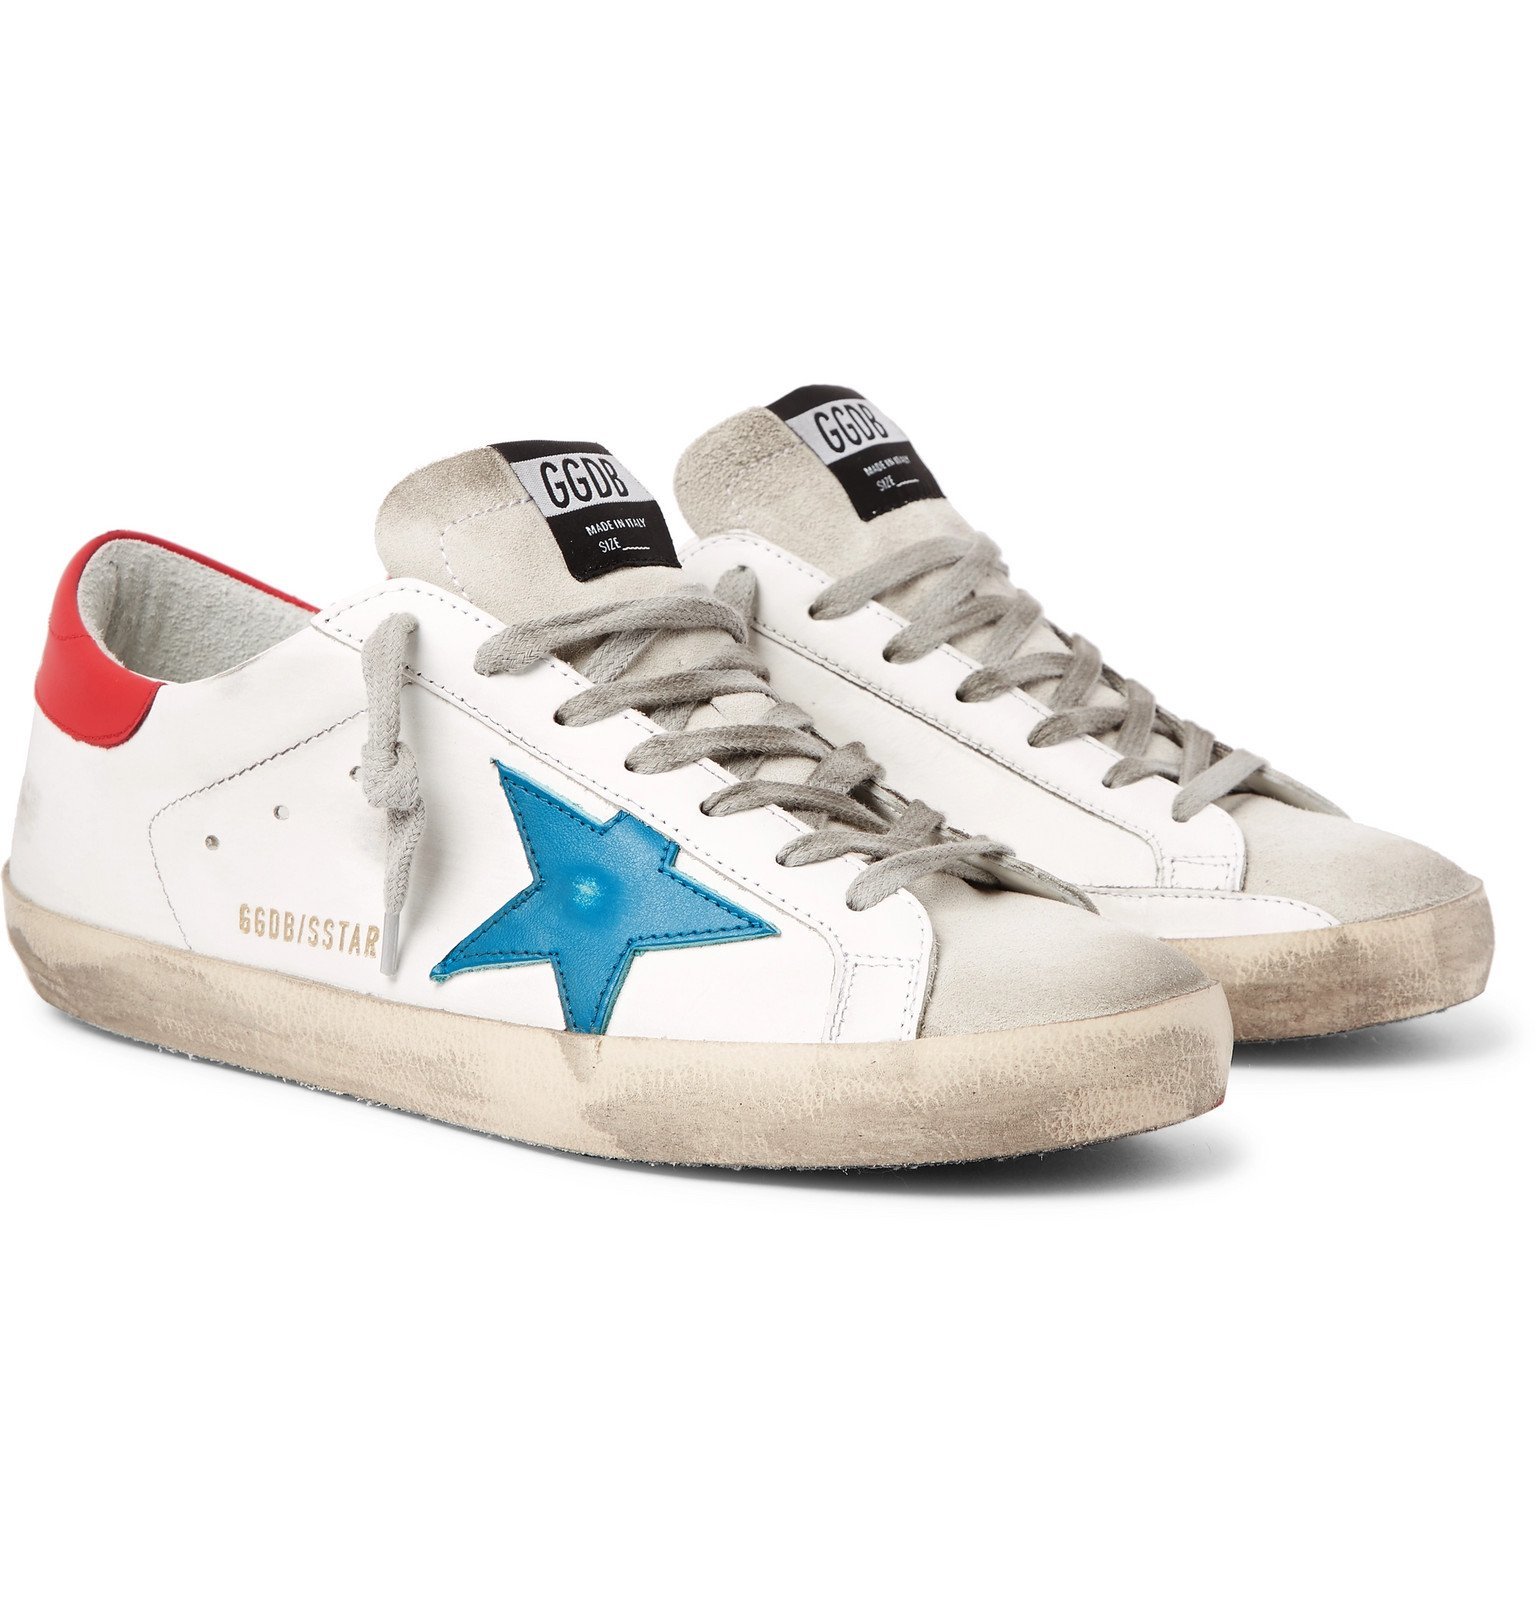 golden goose superstar leather and suede sneakers